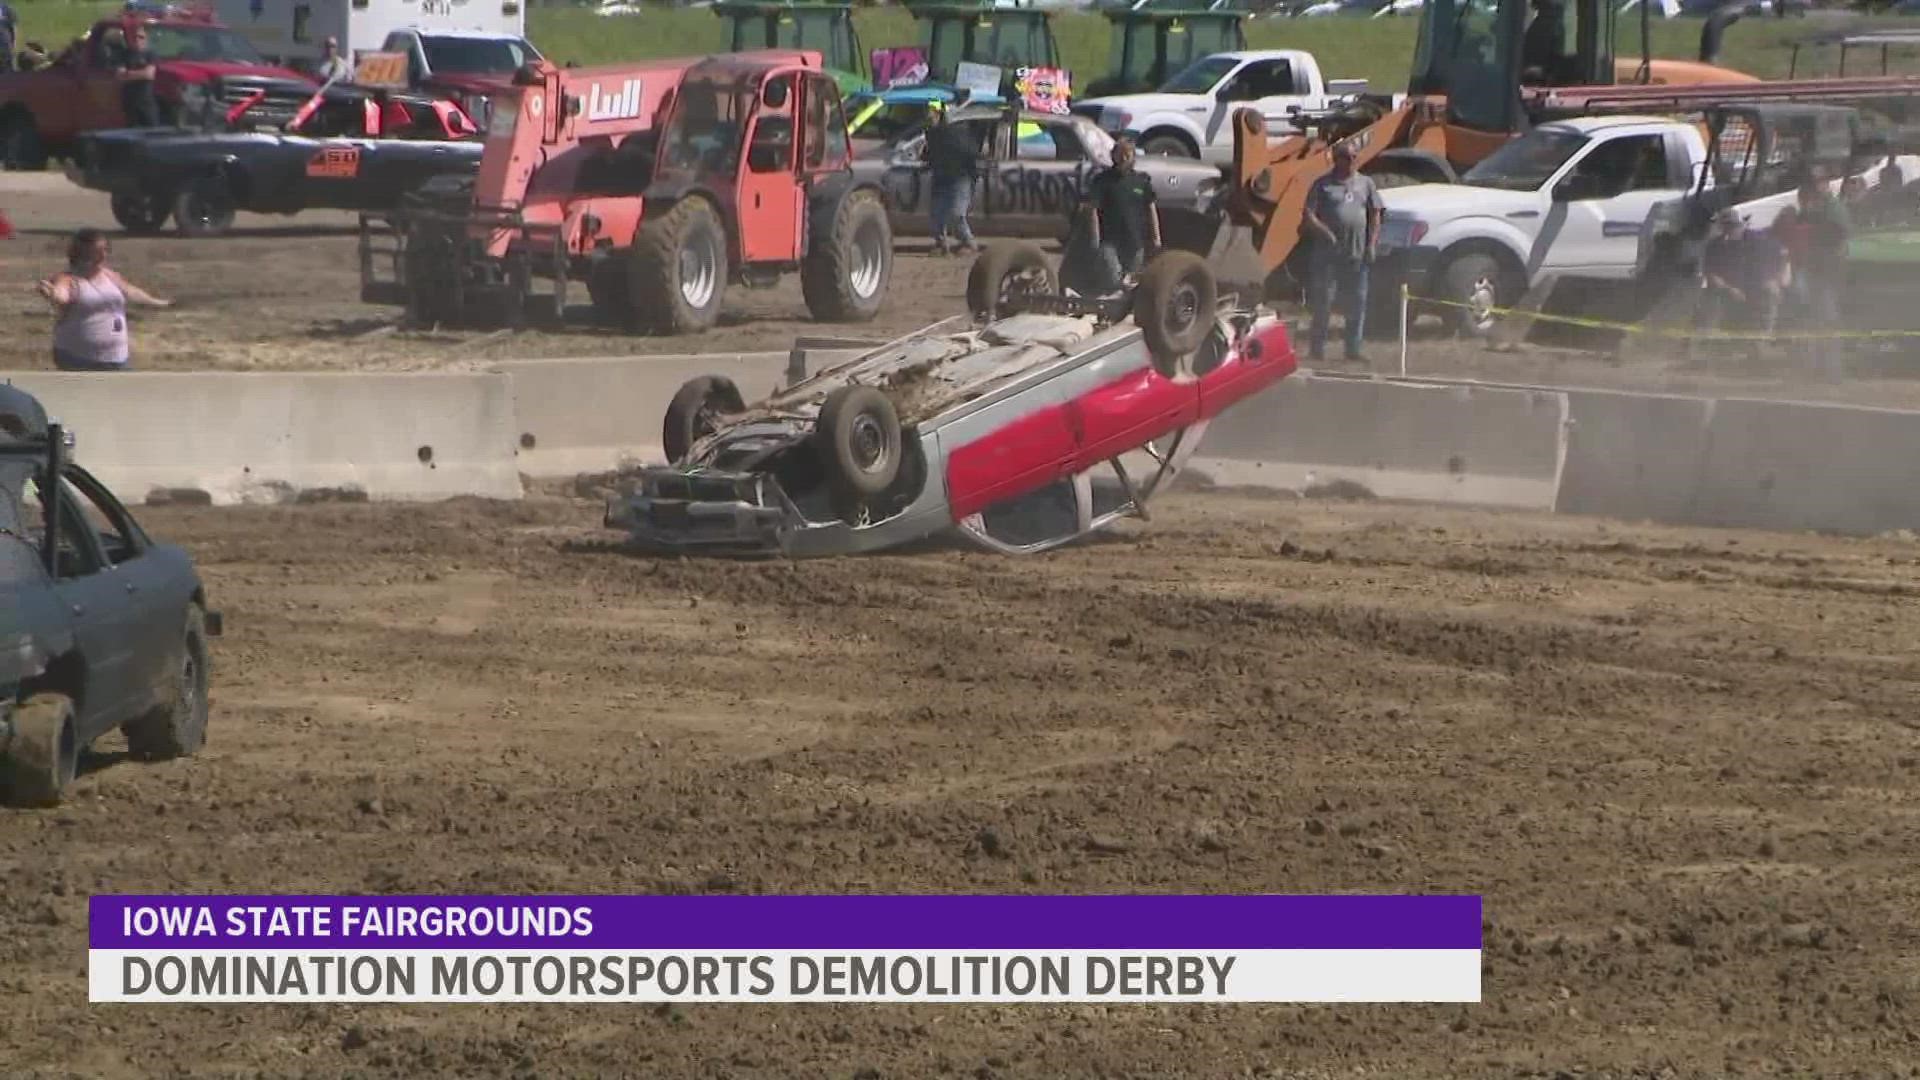 The fan-favorite demolition derby was last at the fair in 2014.